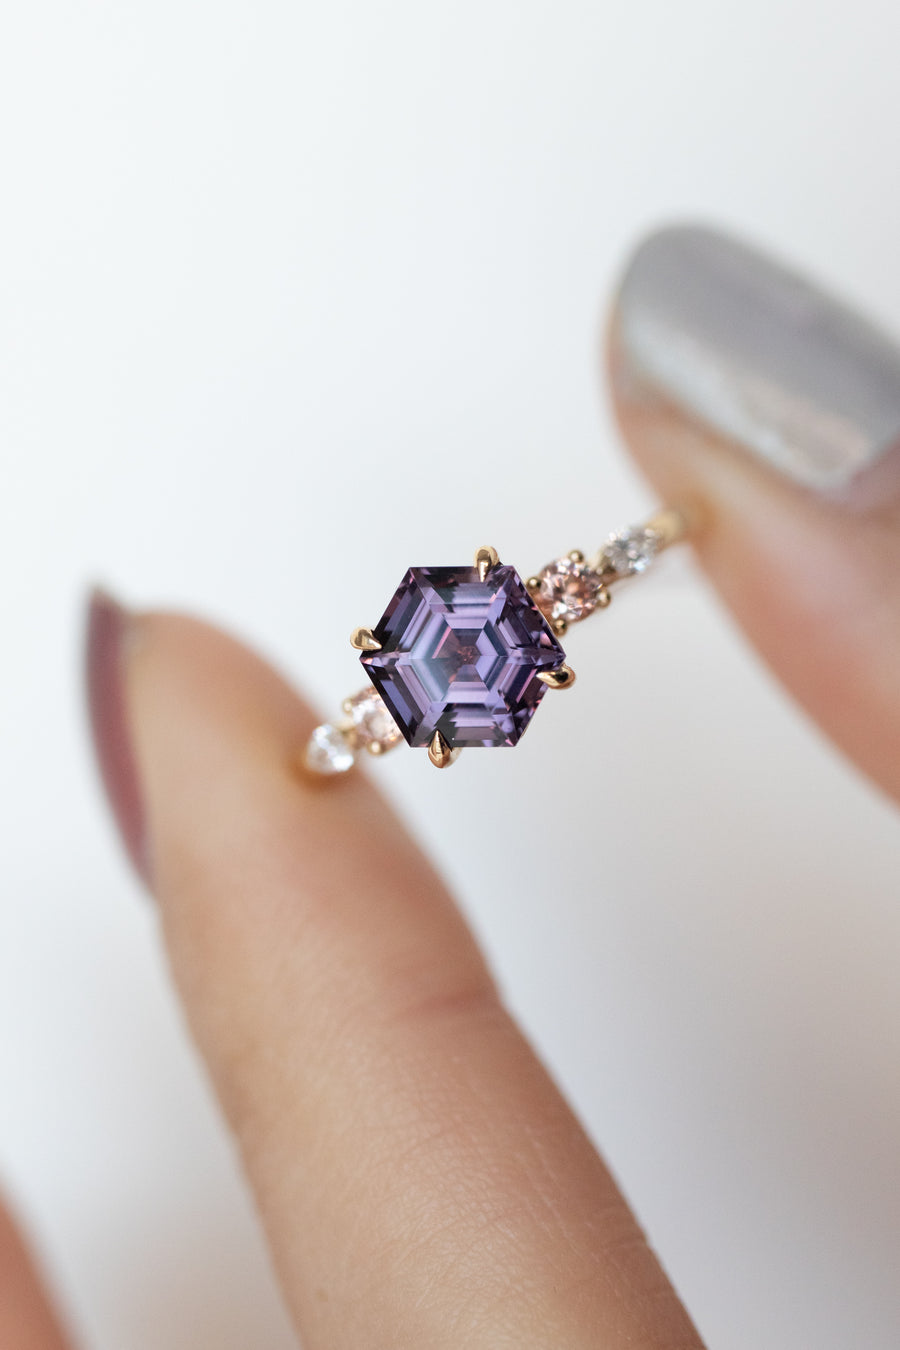 1.21carat Hexagon Purple Spinel with Small Pink Spinel & total 0.07carat Diamonds 18K Yellow Gold Ring